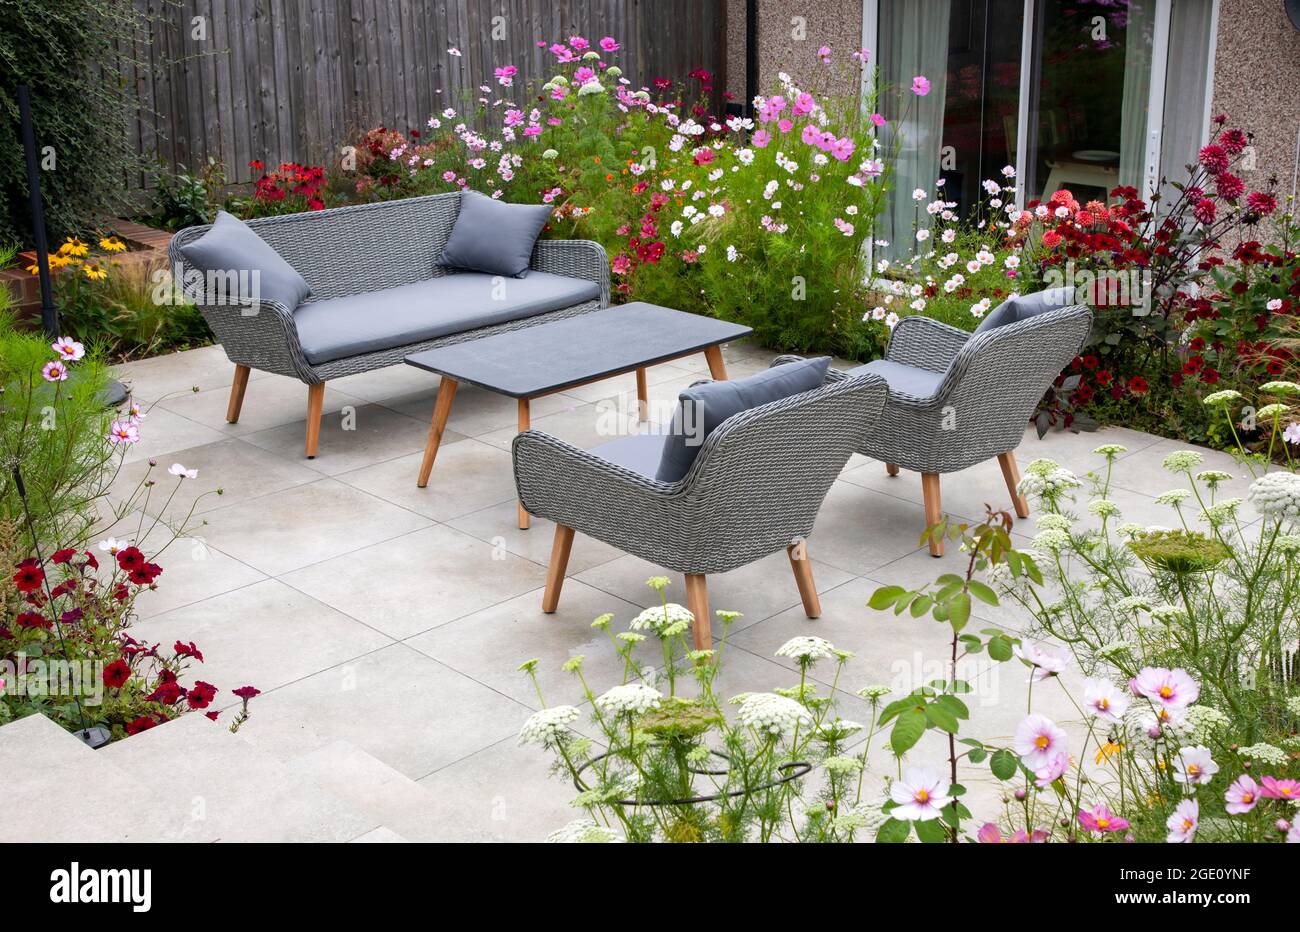 Outdoor living, terrace in the garden with flowers Stock Photo